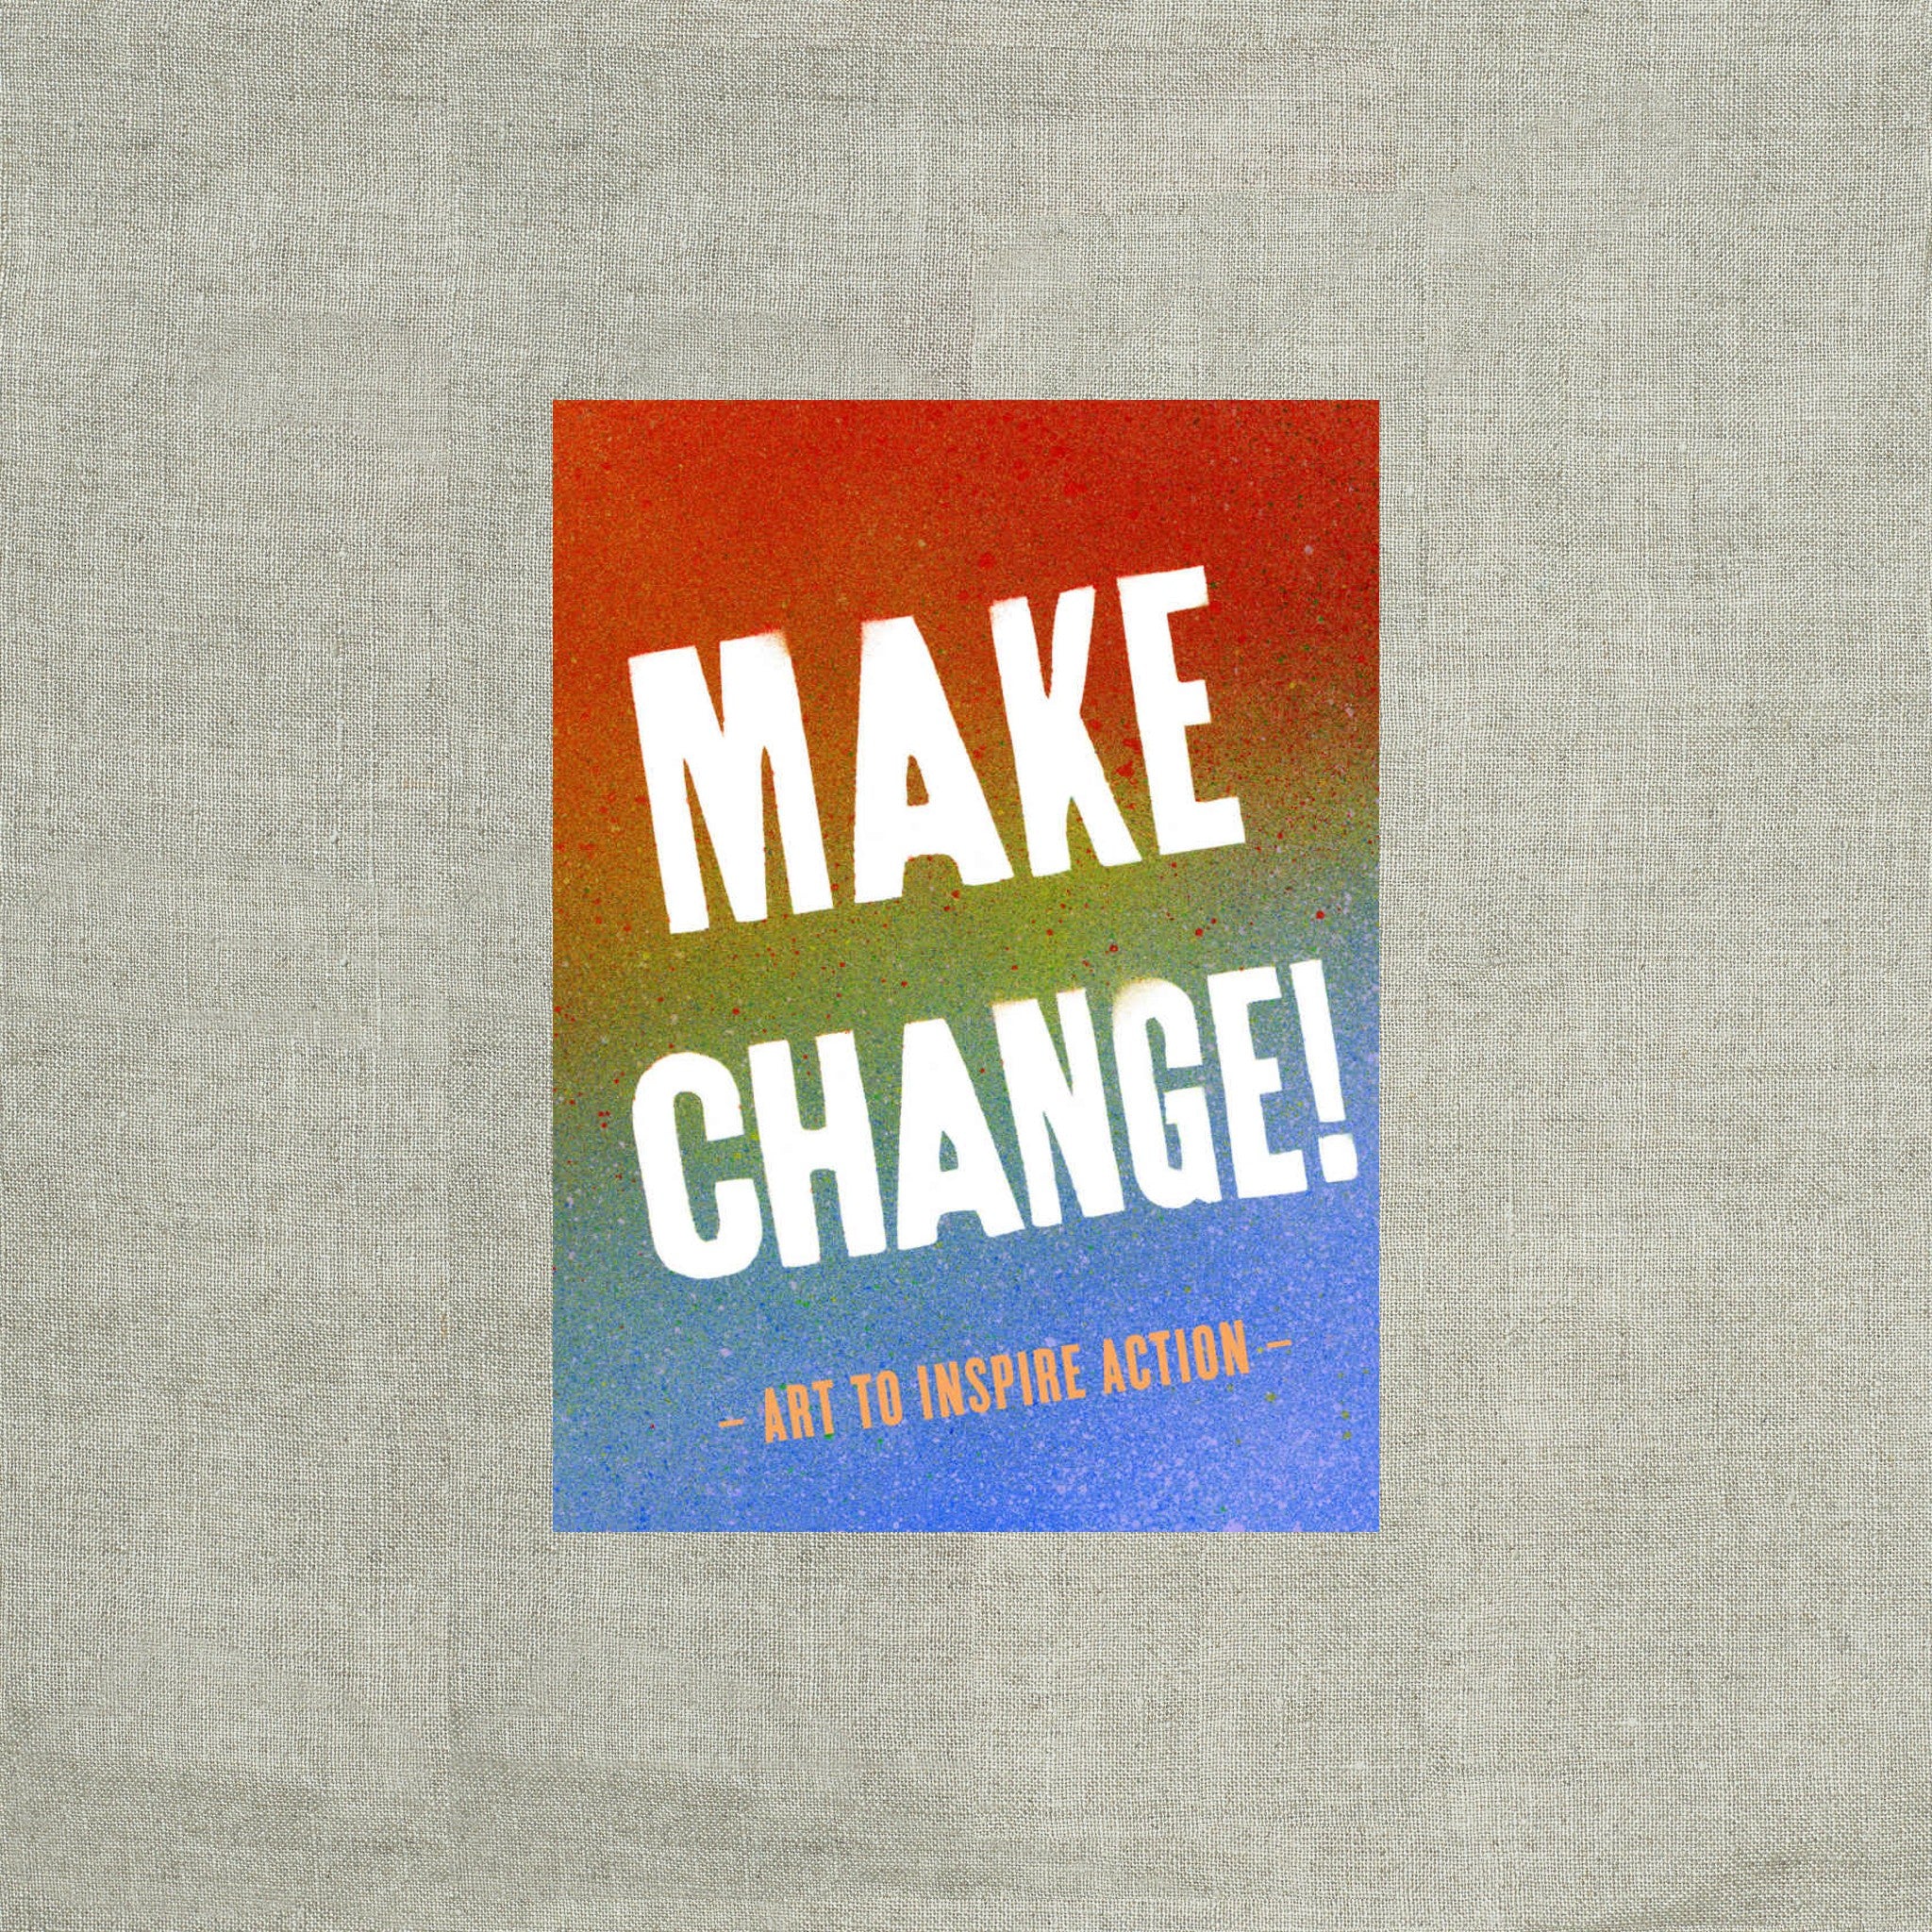 Make Change!: Art to Inspire Action (Inspirational Books for Women and -  The Store at Mia - Minneapolis Institute of Art